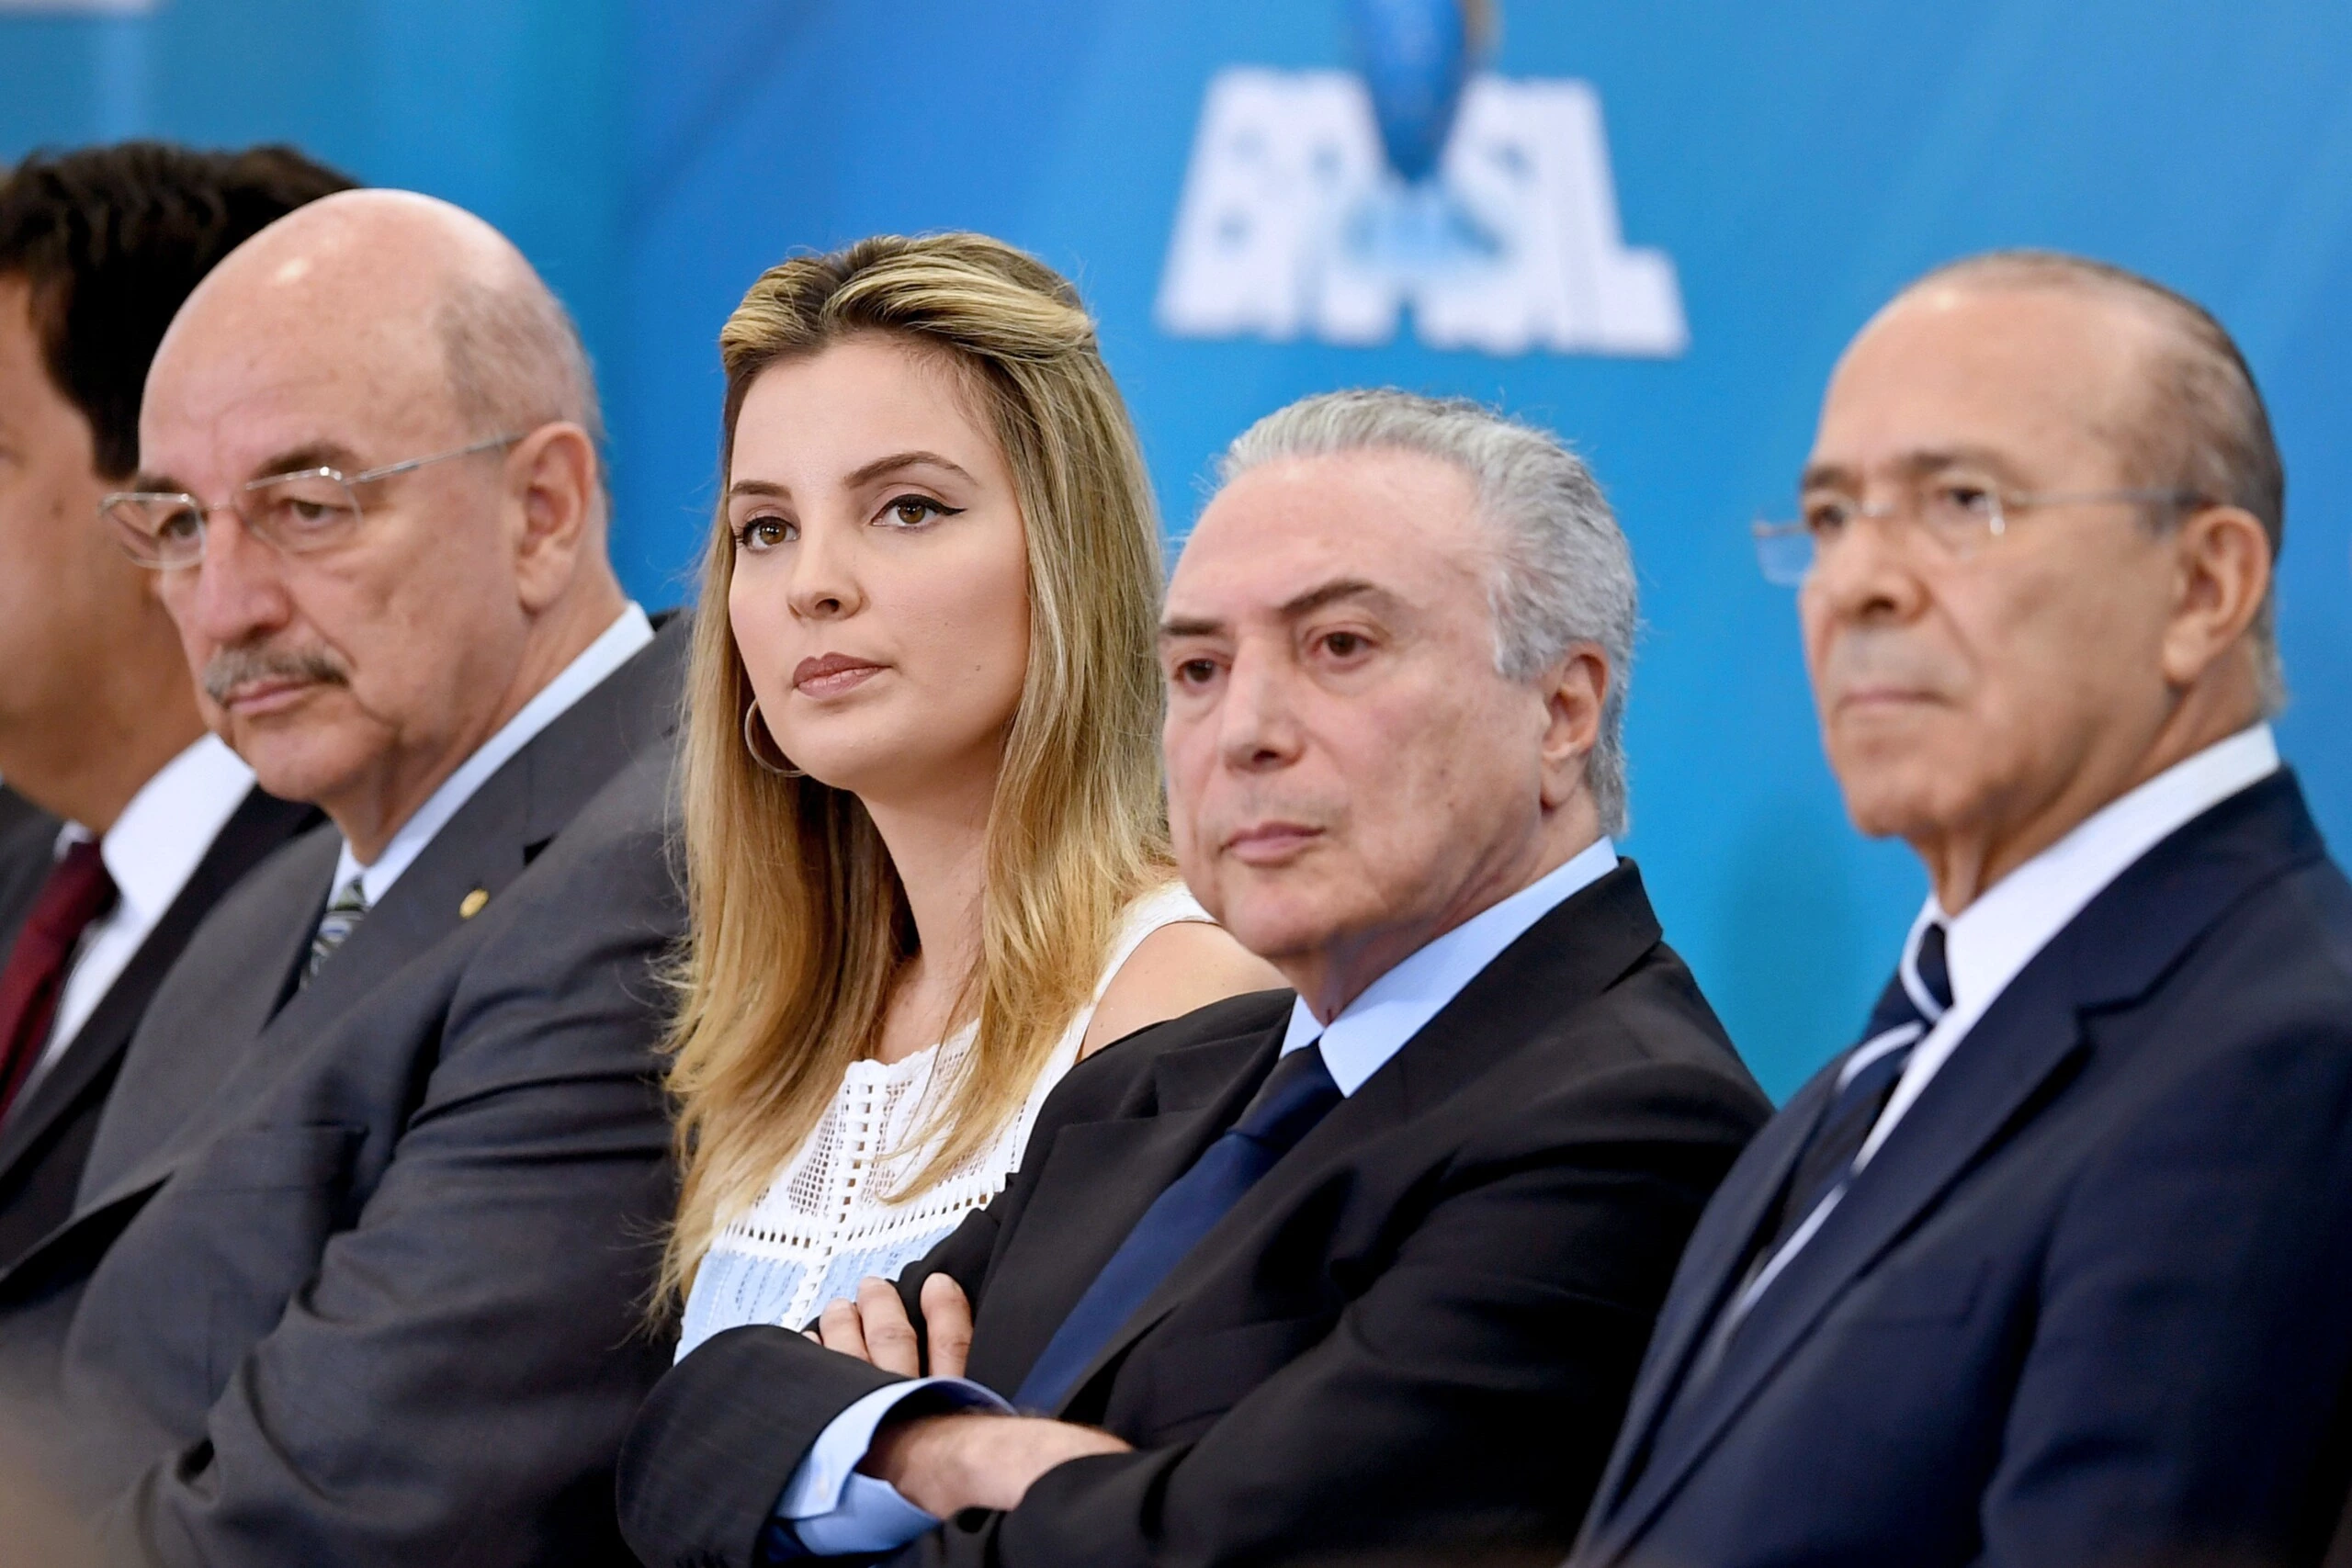 Brazilian First Lady Marcela Temer (2-L), Brazilian President Michel Temer (2-R), Chief of Staff Eliseu Padilha (R) and Minister of Social Development Osmar Terra attend the launching ceremony of the Happy Child Programme at Planalto Palace in Brasilia, Brazil, on October 5, 2016. / AFP / EVARISTO SA        (Photo credit should read EVARISTO SA/AFP/Getty Images)